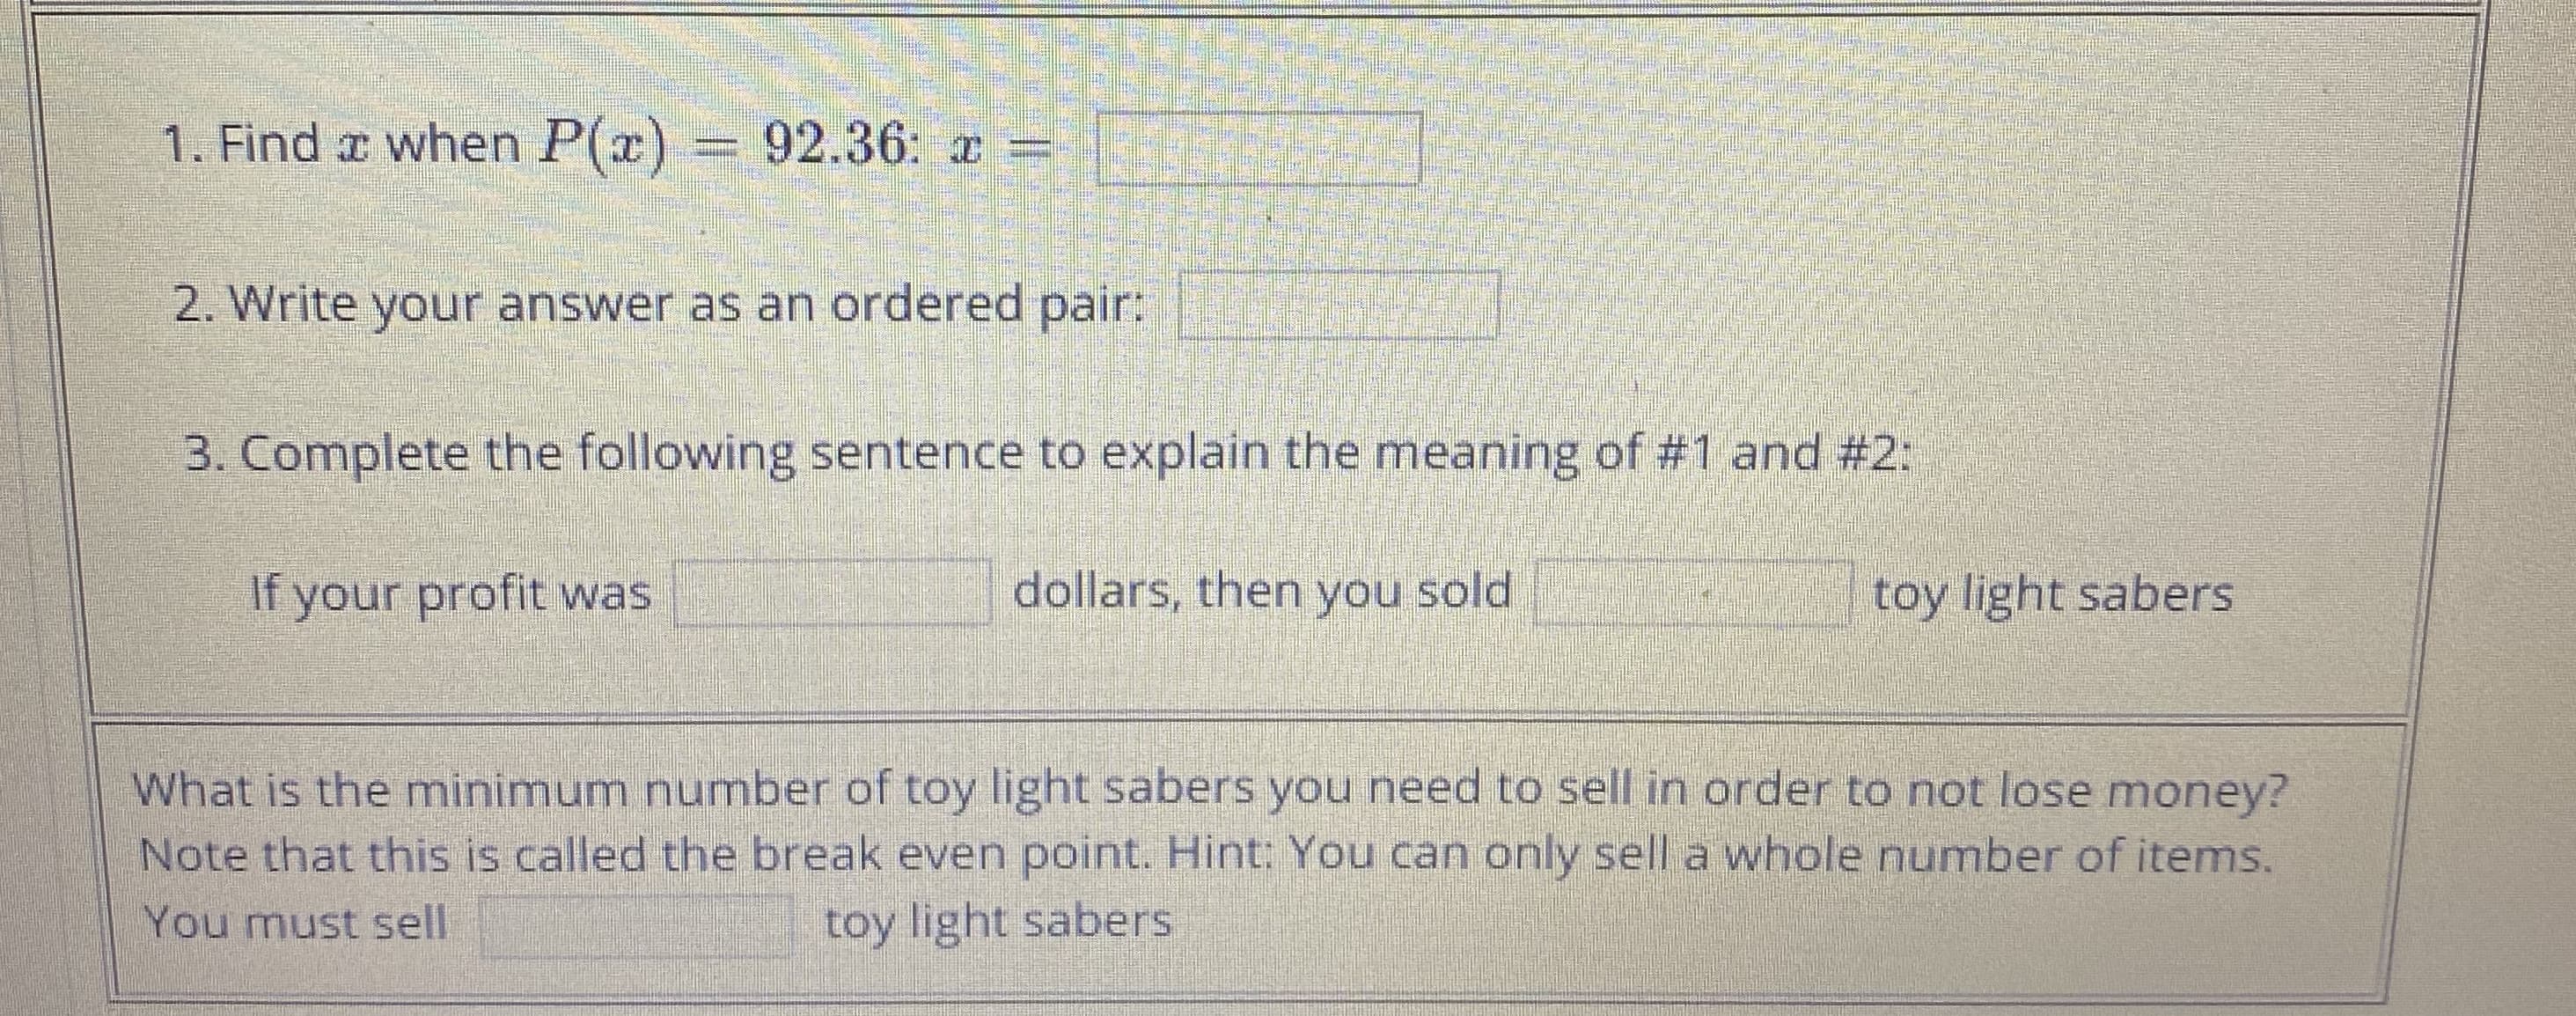 = 92.36: x
1. Find r when P(r)
2. Write your answer as an ordered pair:
3. Complete the following sentence to explain the meaning of #1 and #2:
If your profit was
dollars, then you sold
toy light sabers
What is the minimum number of toy light sabers you need to sell in order to not lose money?
Note that this is called the break even point. Hint: You can only sell a whole number of items.
You must sell
toy light sabers
